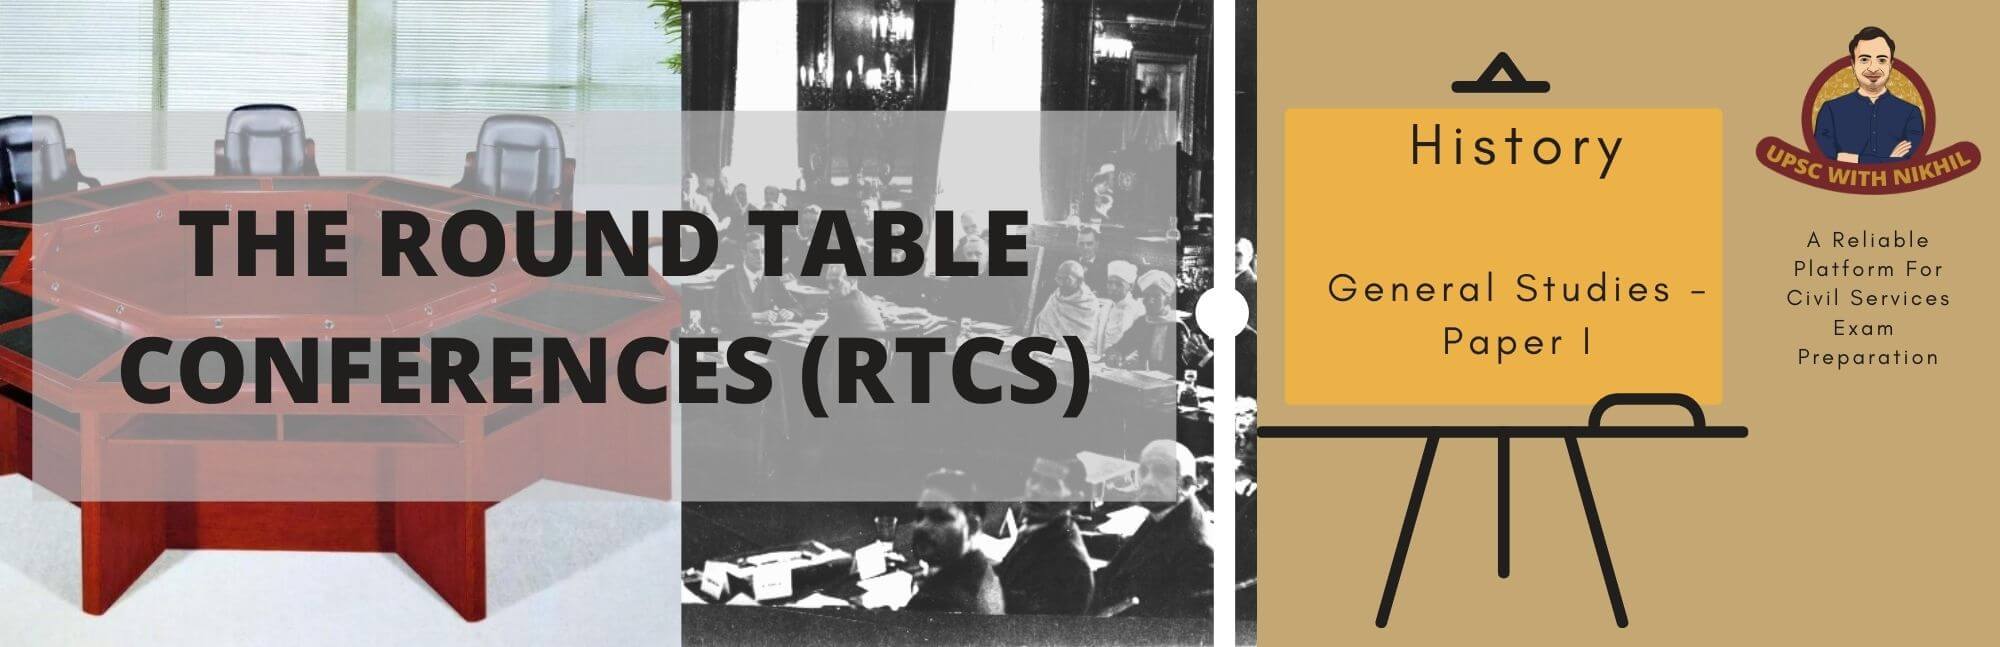 The Round Table Conferences Rtcs, Why Was The Second Round Table Conference Held